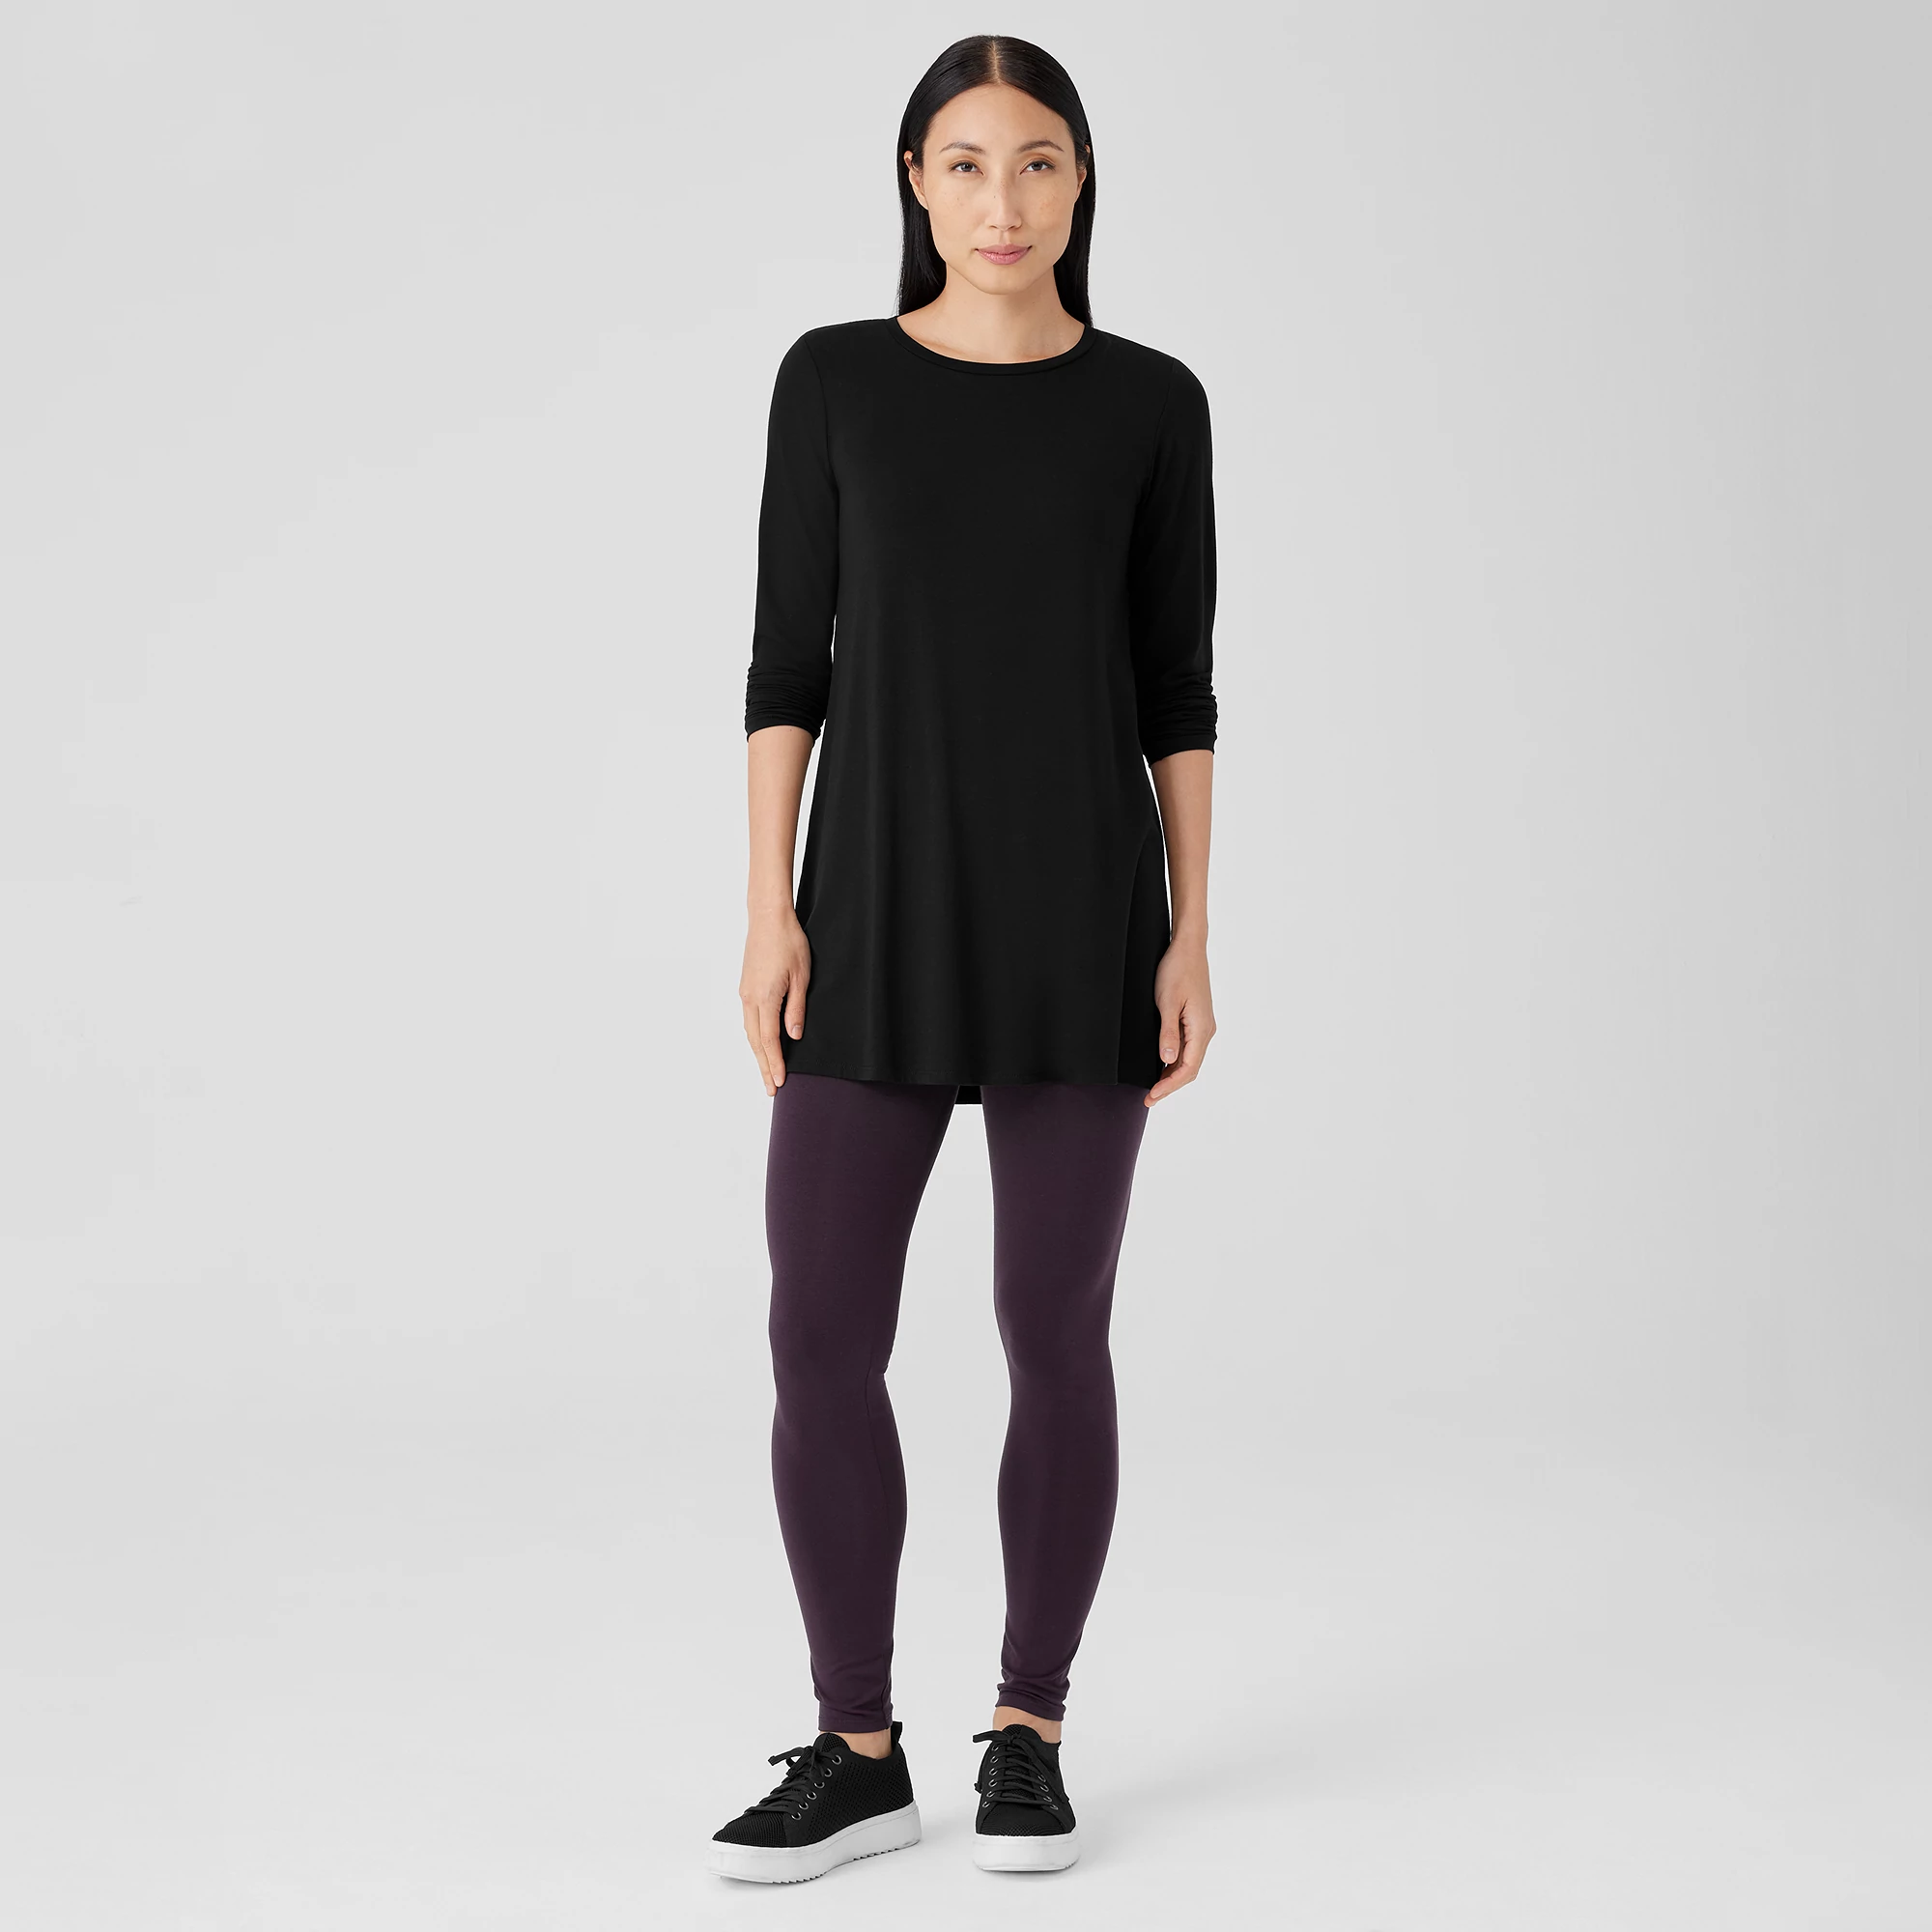 Eileen Fisher Asymmetrical Poncho & Leather Front Leggings